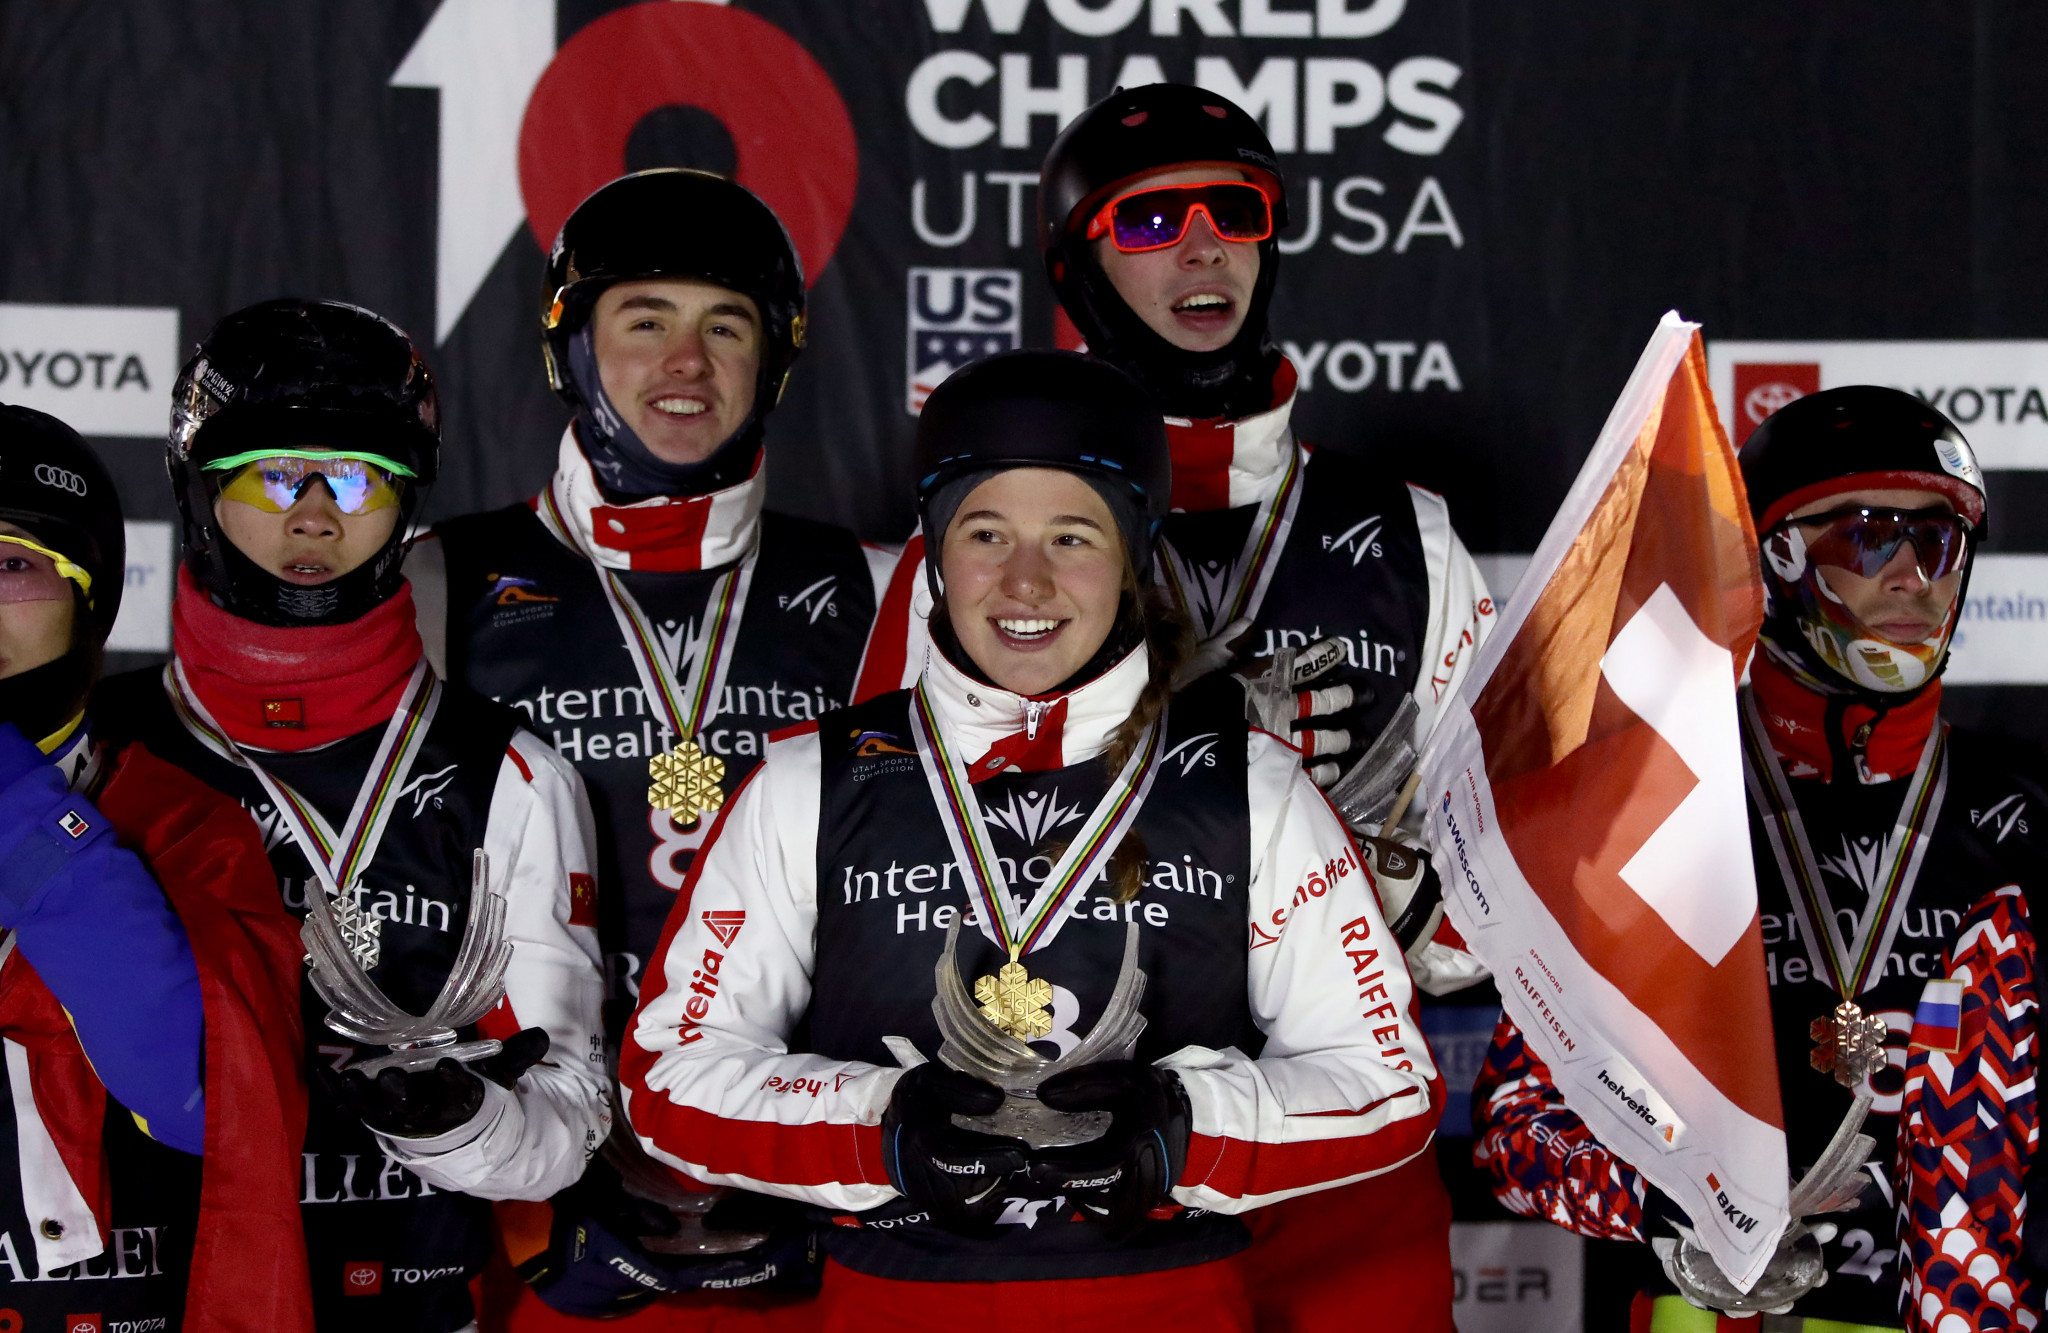 Switzerland clinch surprise mixed team aerials win at Freestyle Ski and Snowboarding World Championships